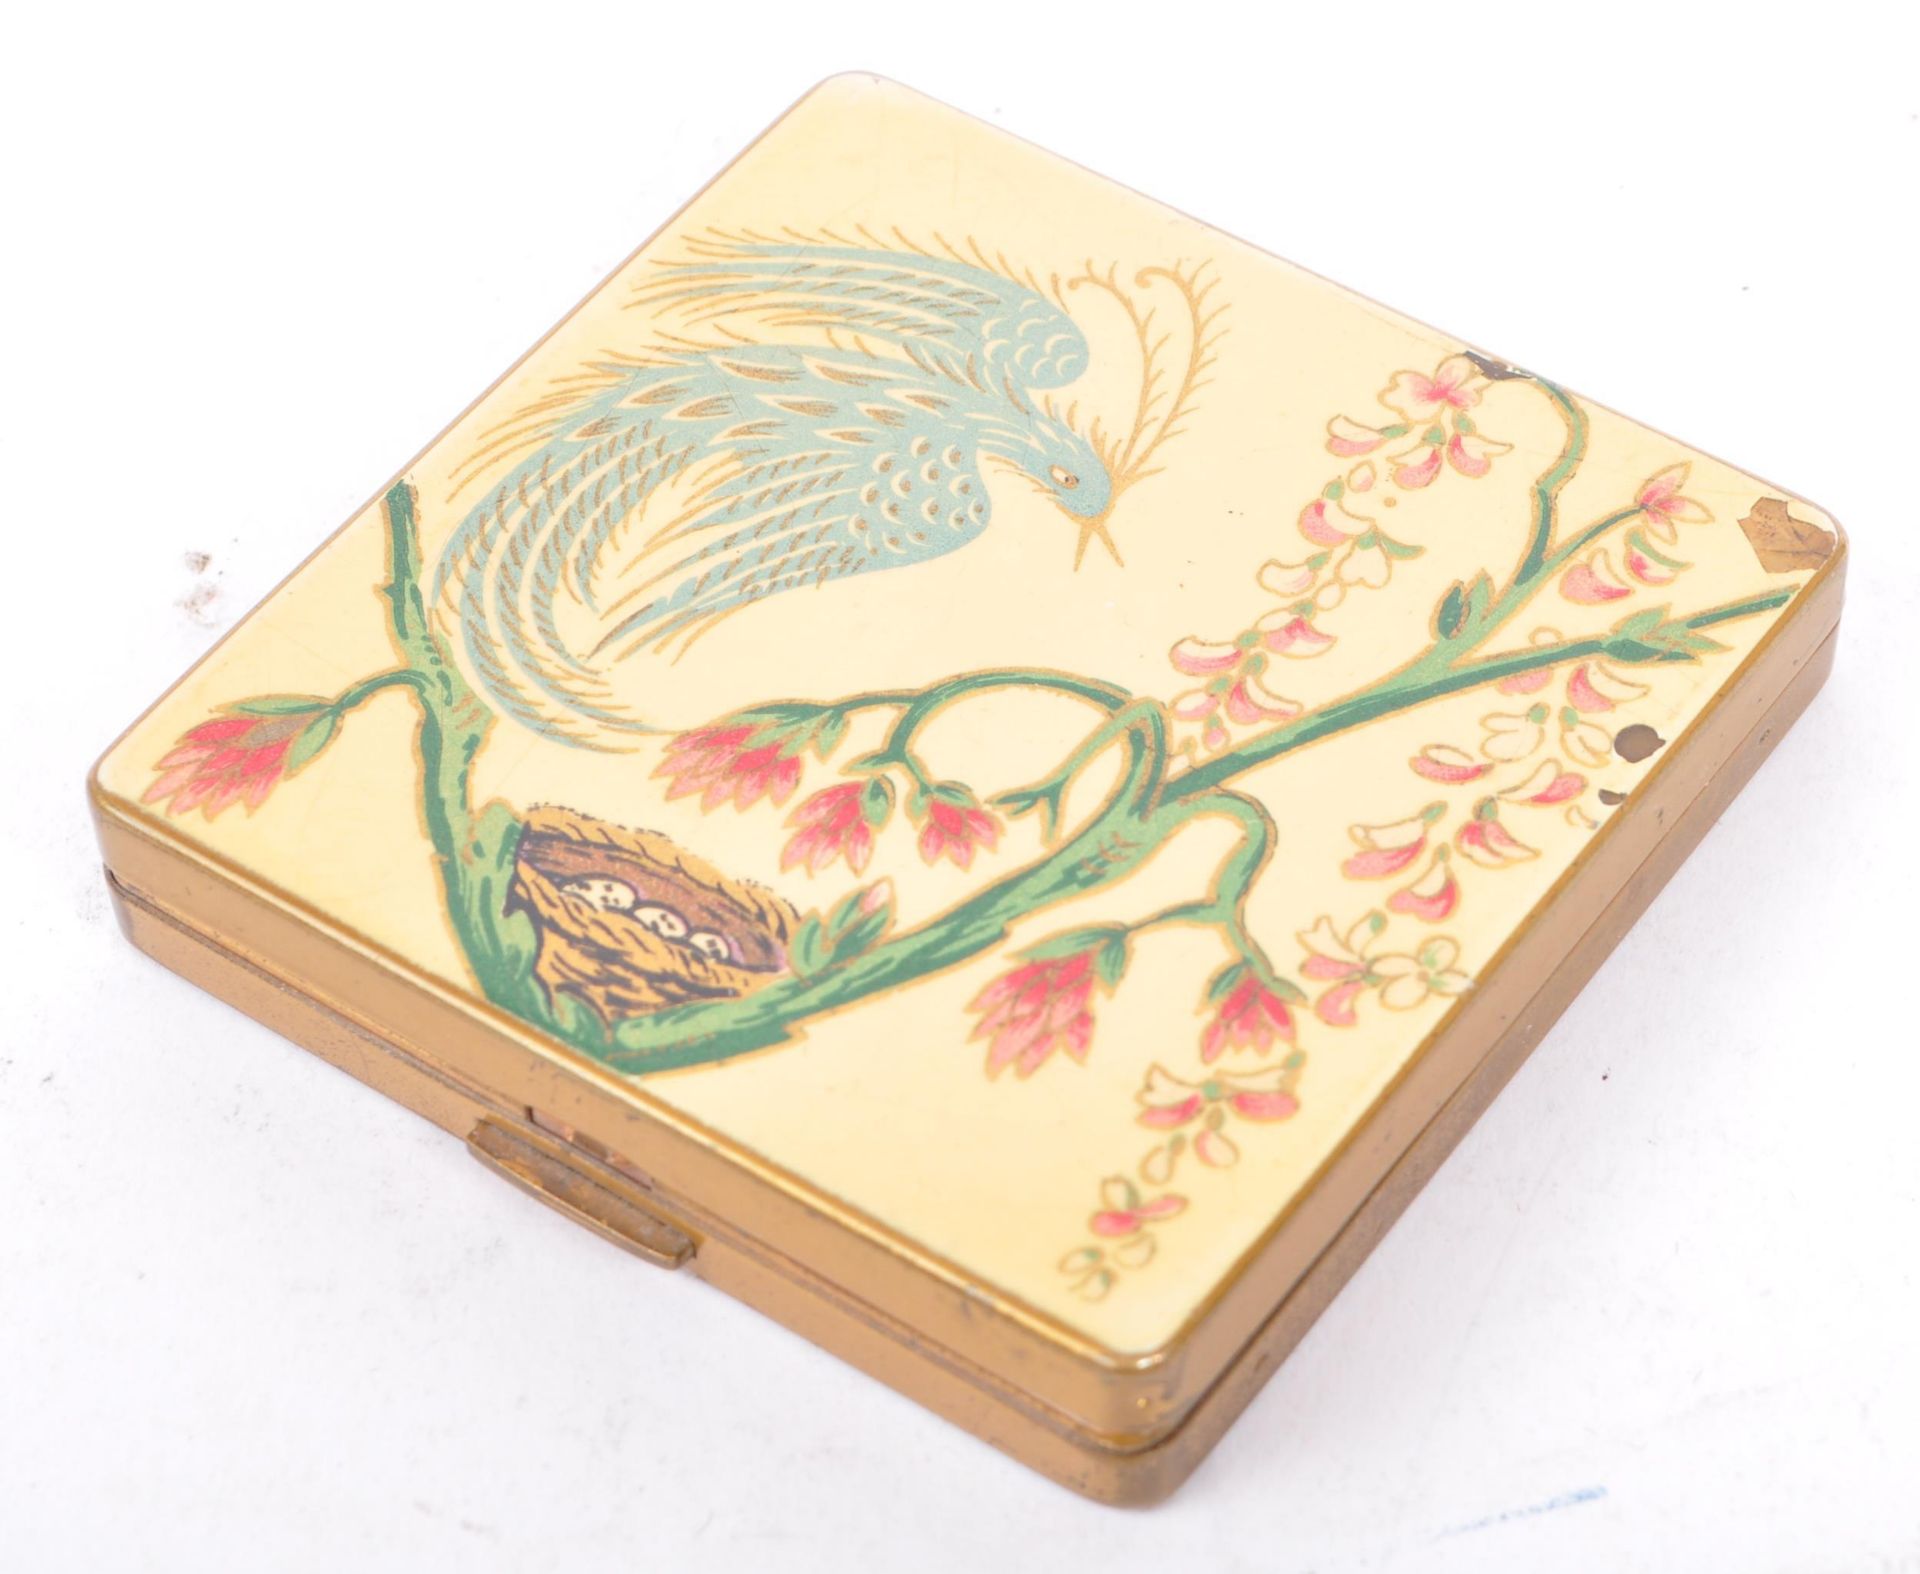 COLLECTION OF 20TH CENTURY VINTAGE VANITY COMPACTS - Image 8 of 10